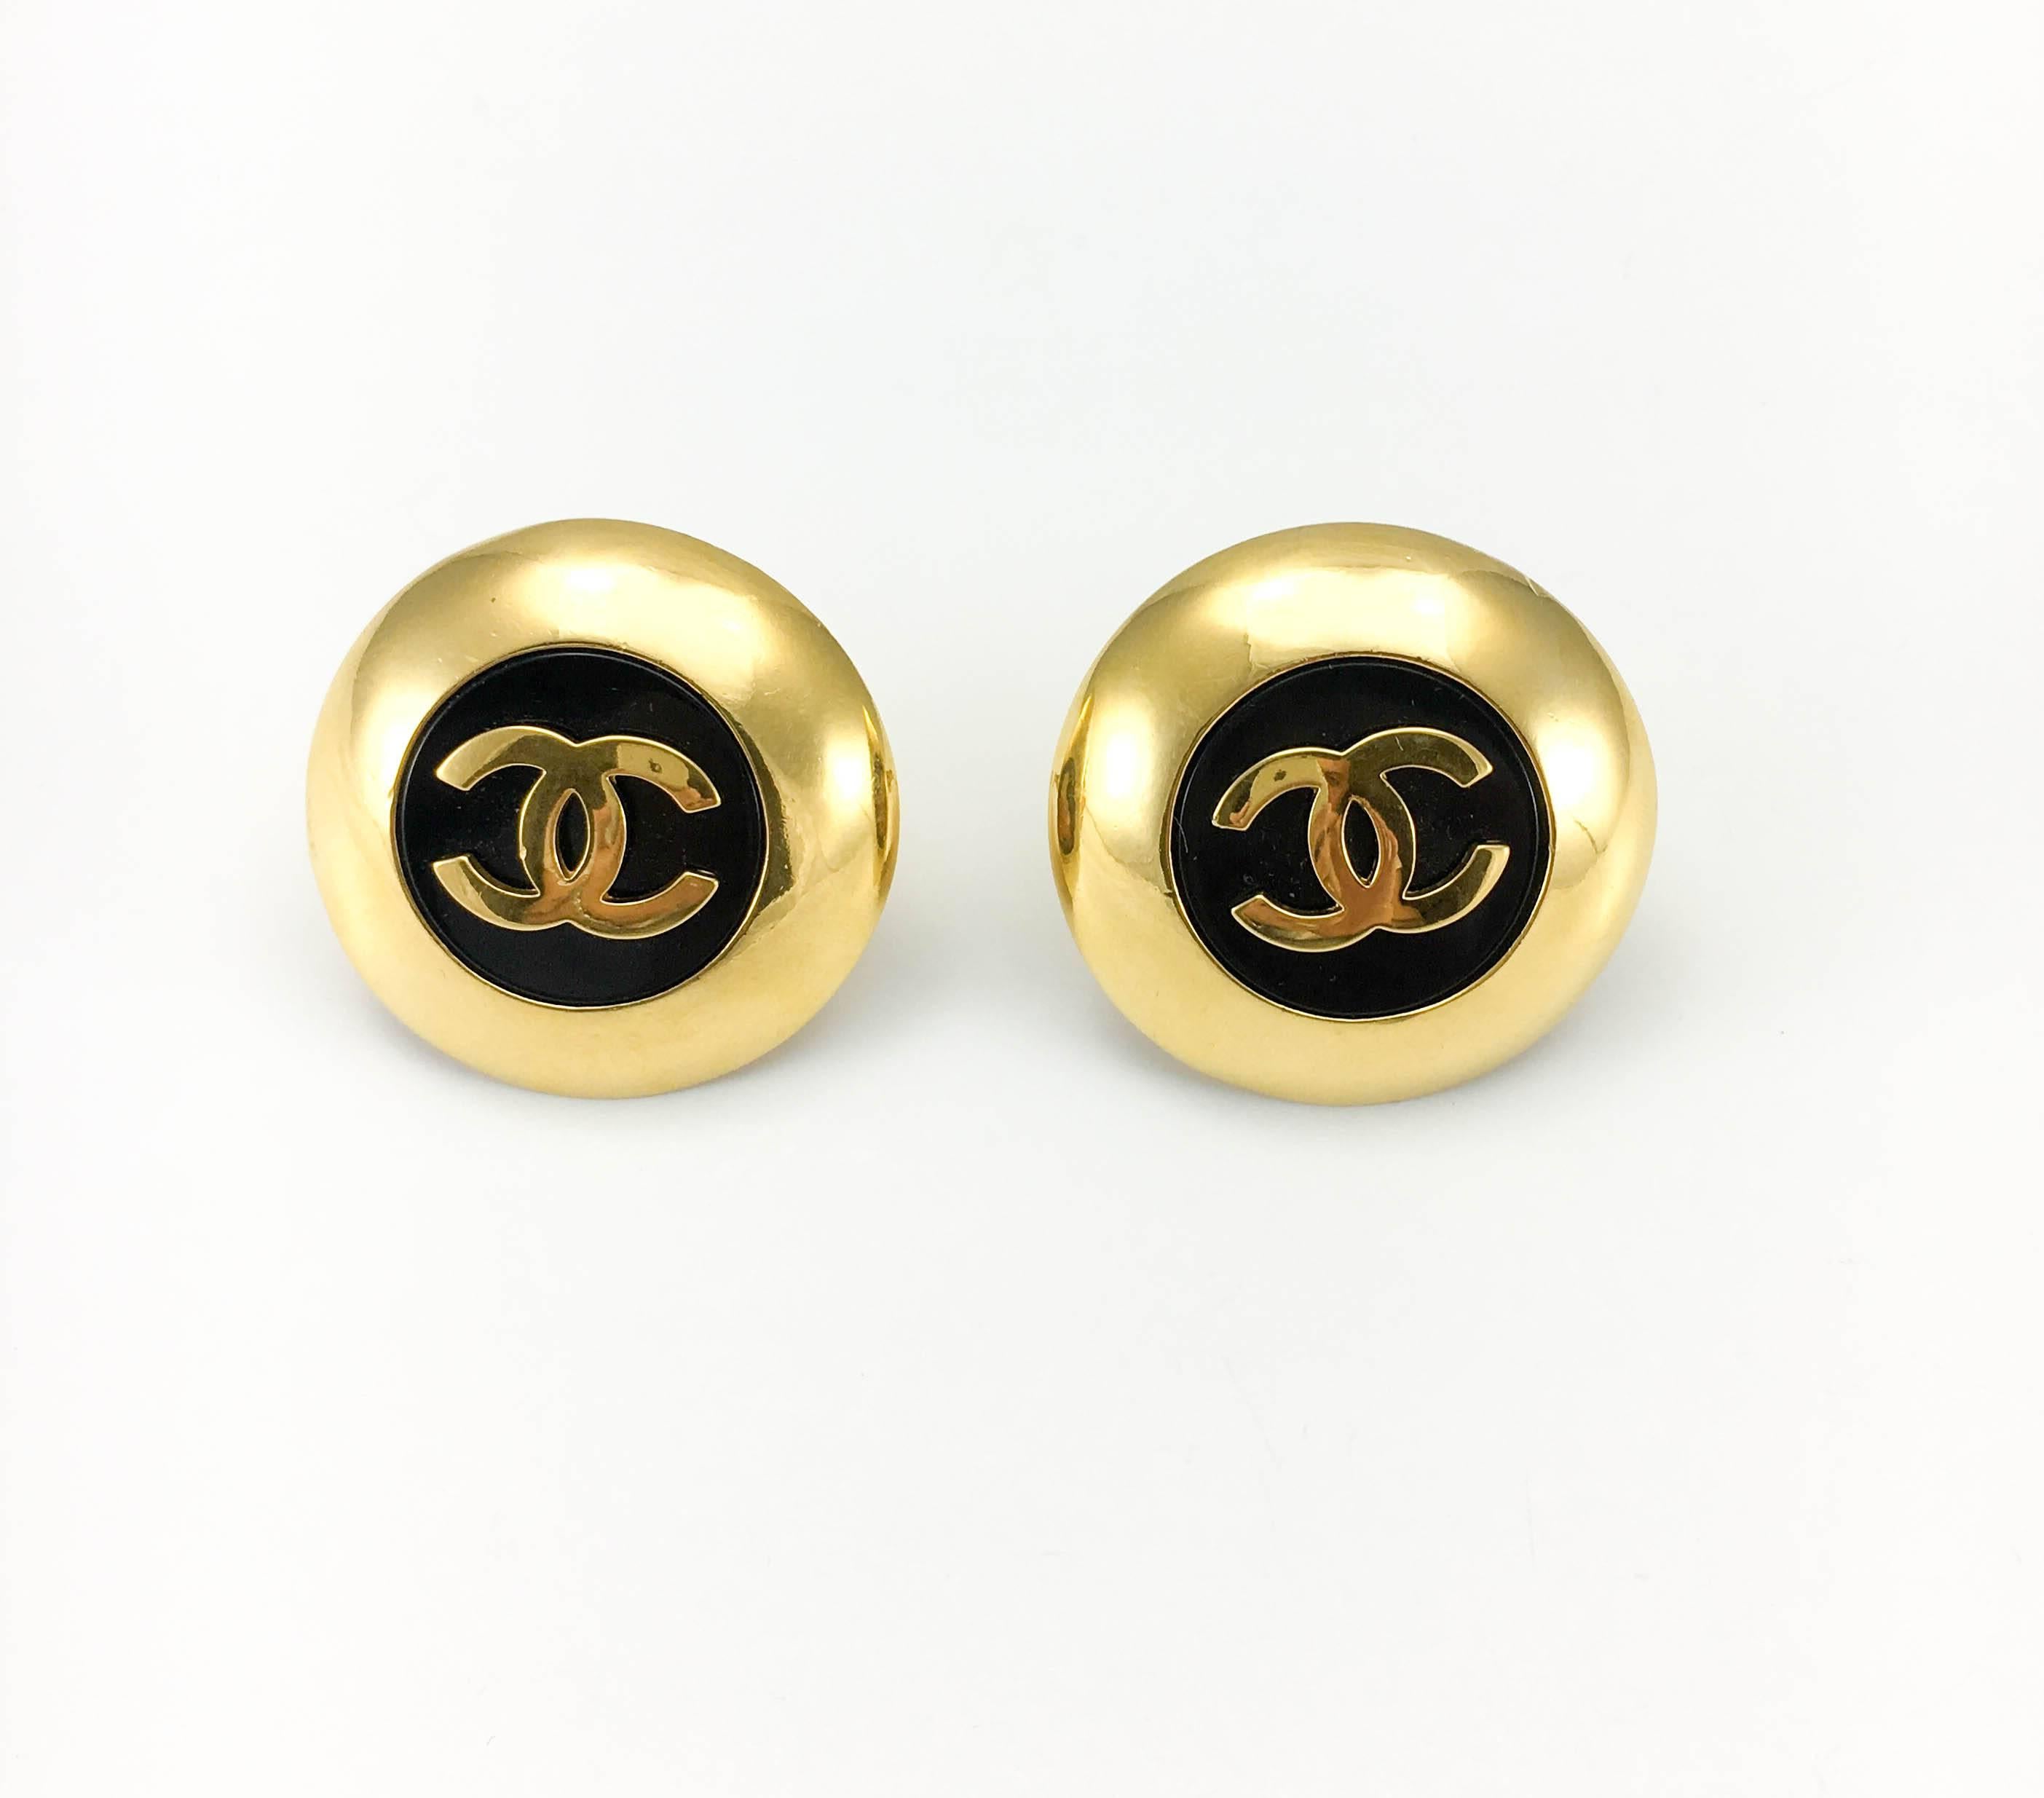 Gorgeous Vintage Chanel Logo Clip-On Earrings. These fabulous earrings by Chanel were created by super jewellery designer Victoire de Castellane for the 1989 collection. In gold-plated hardware, the round design features black resin in the centre